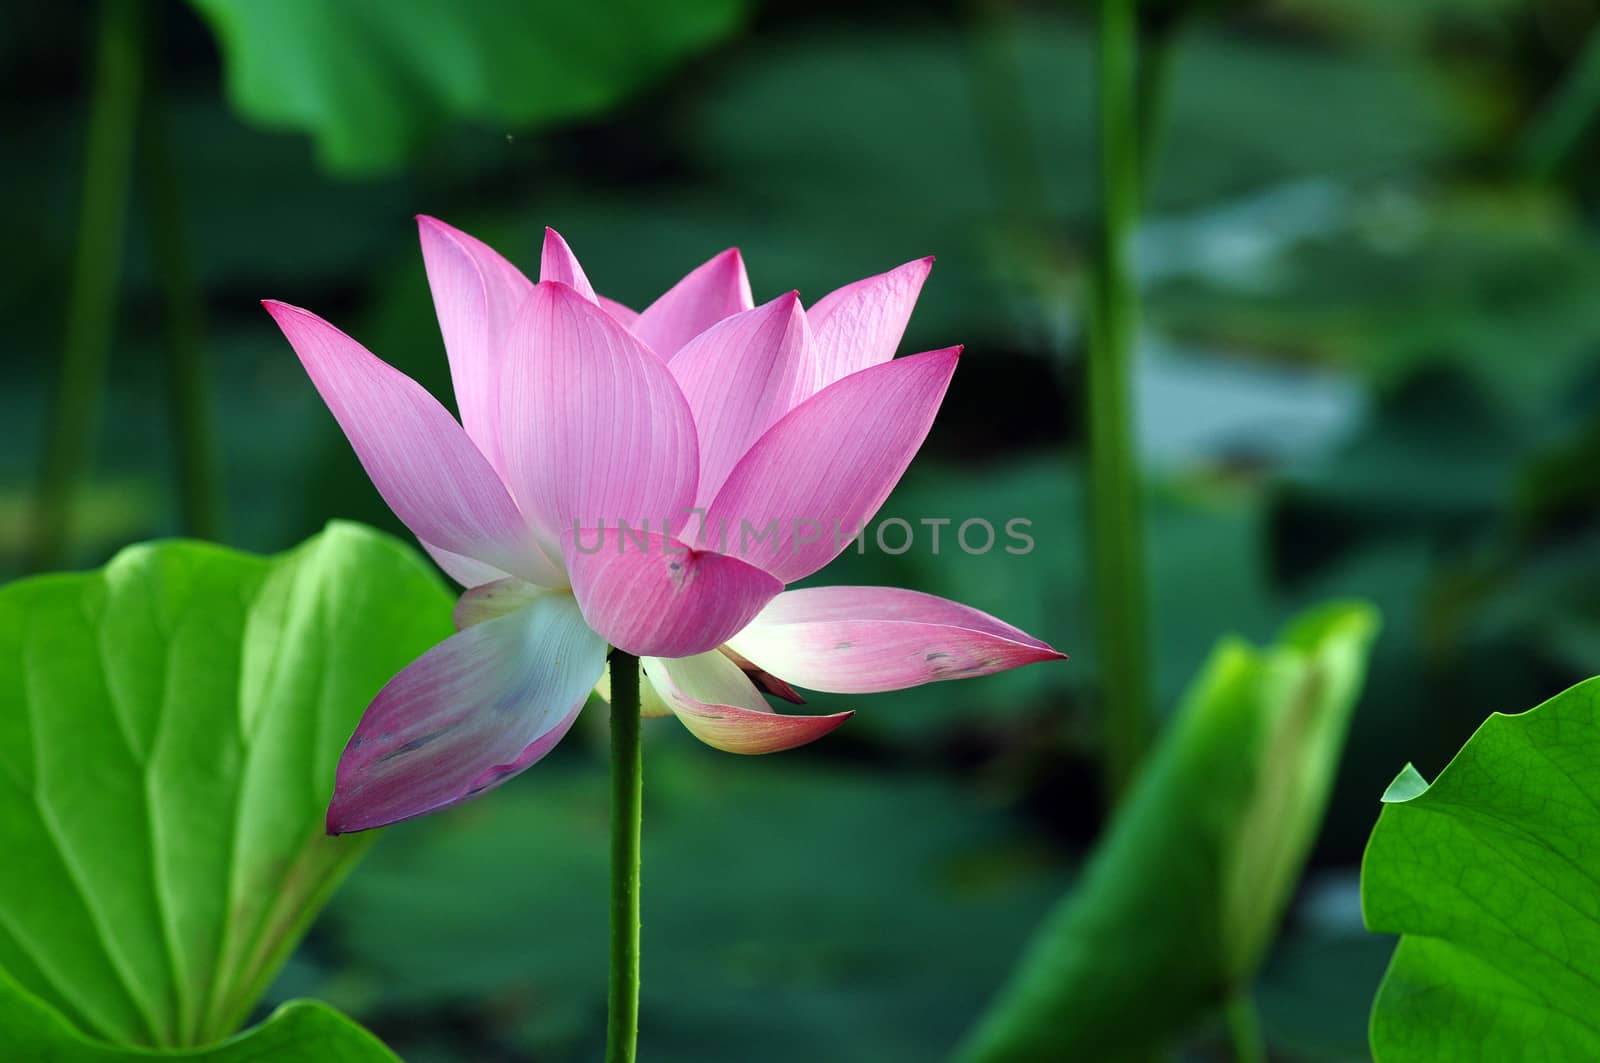 Lotus flower and plant in a pond